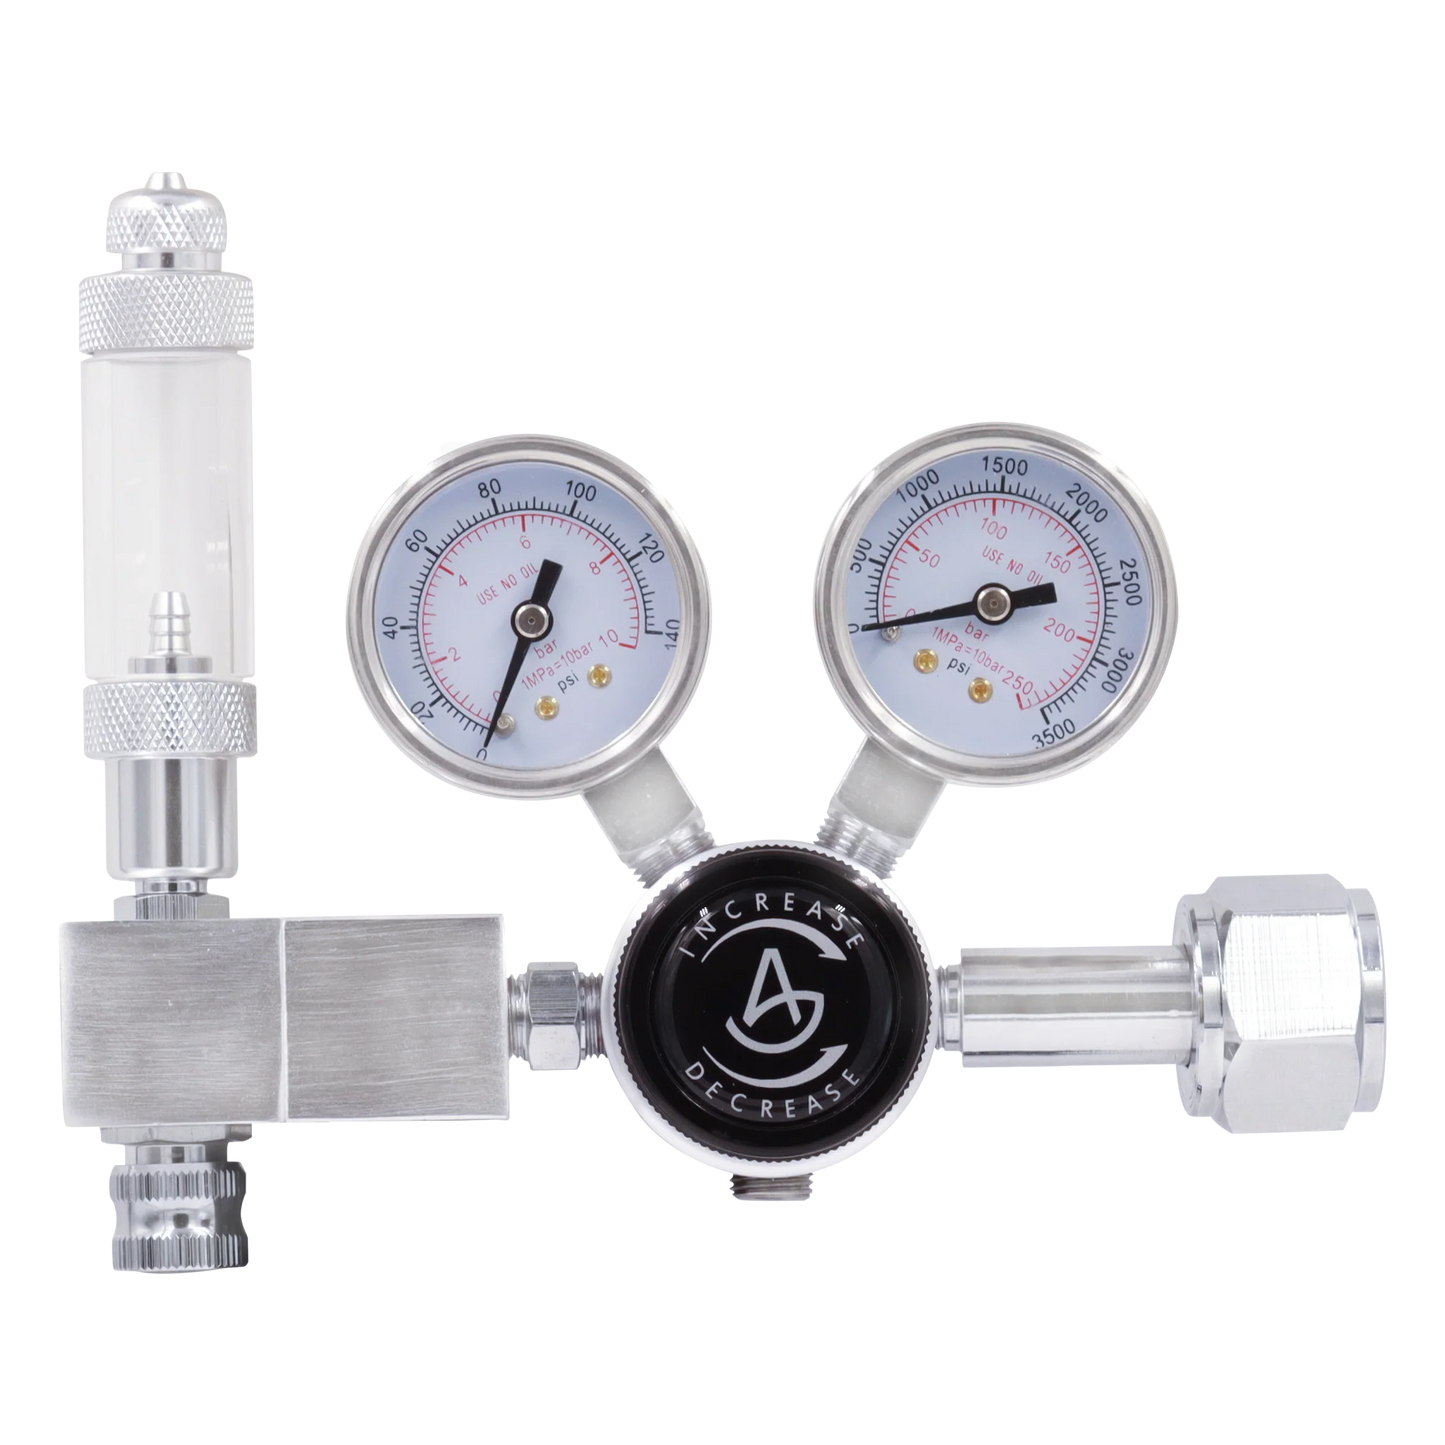 AquaLabs - Pro Dual Stage CO2 Regulator with Solenoid